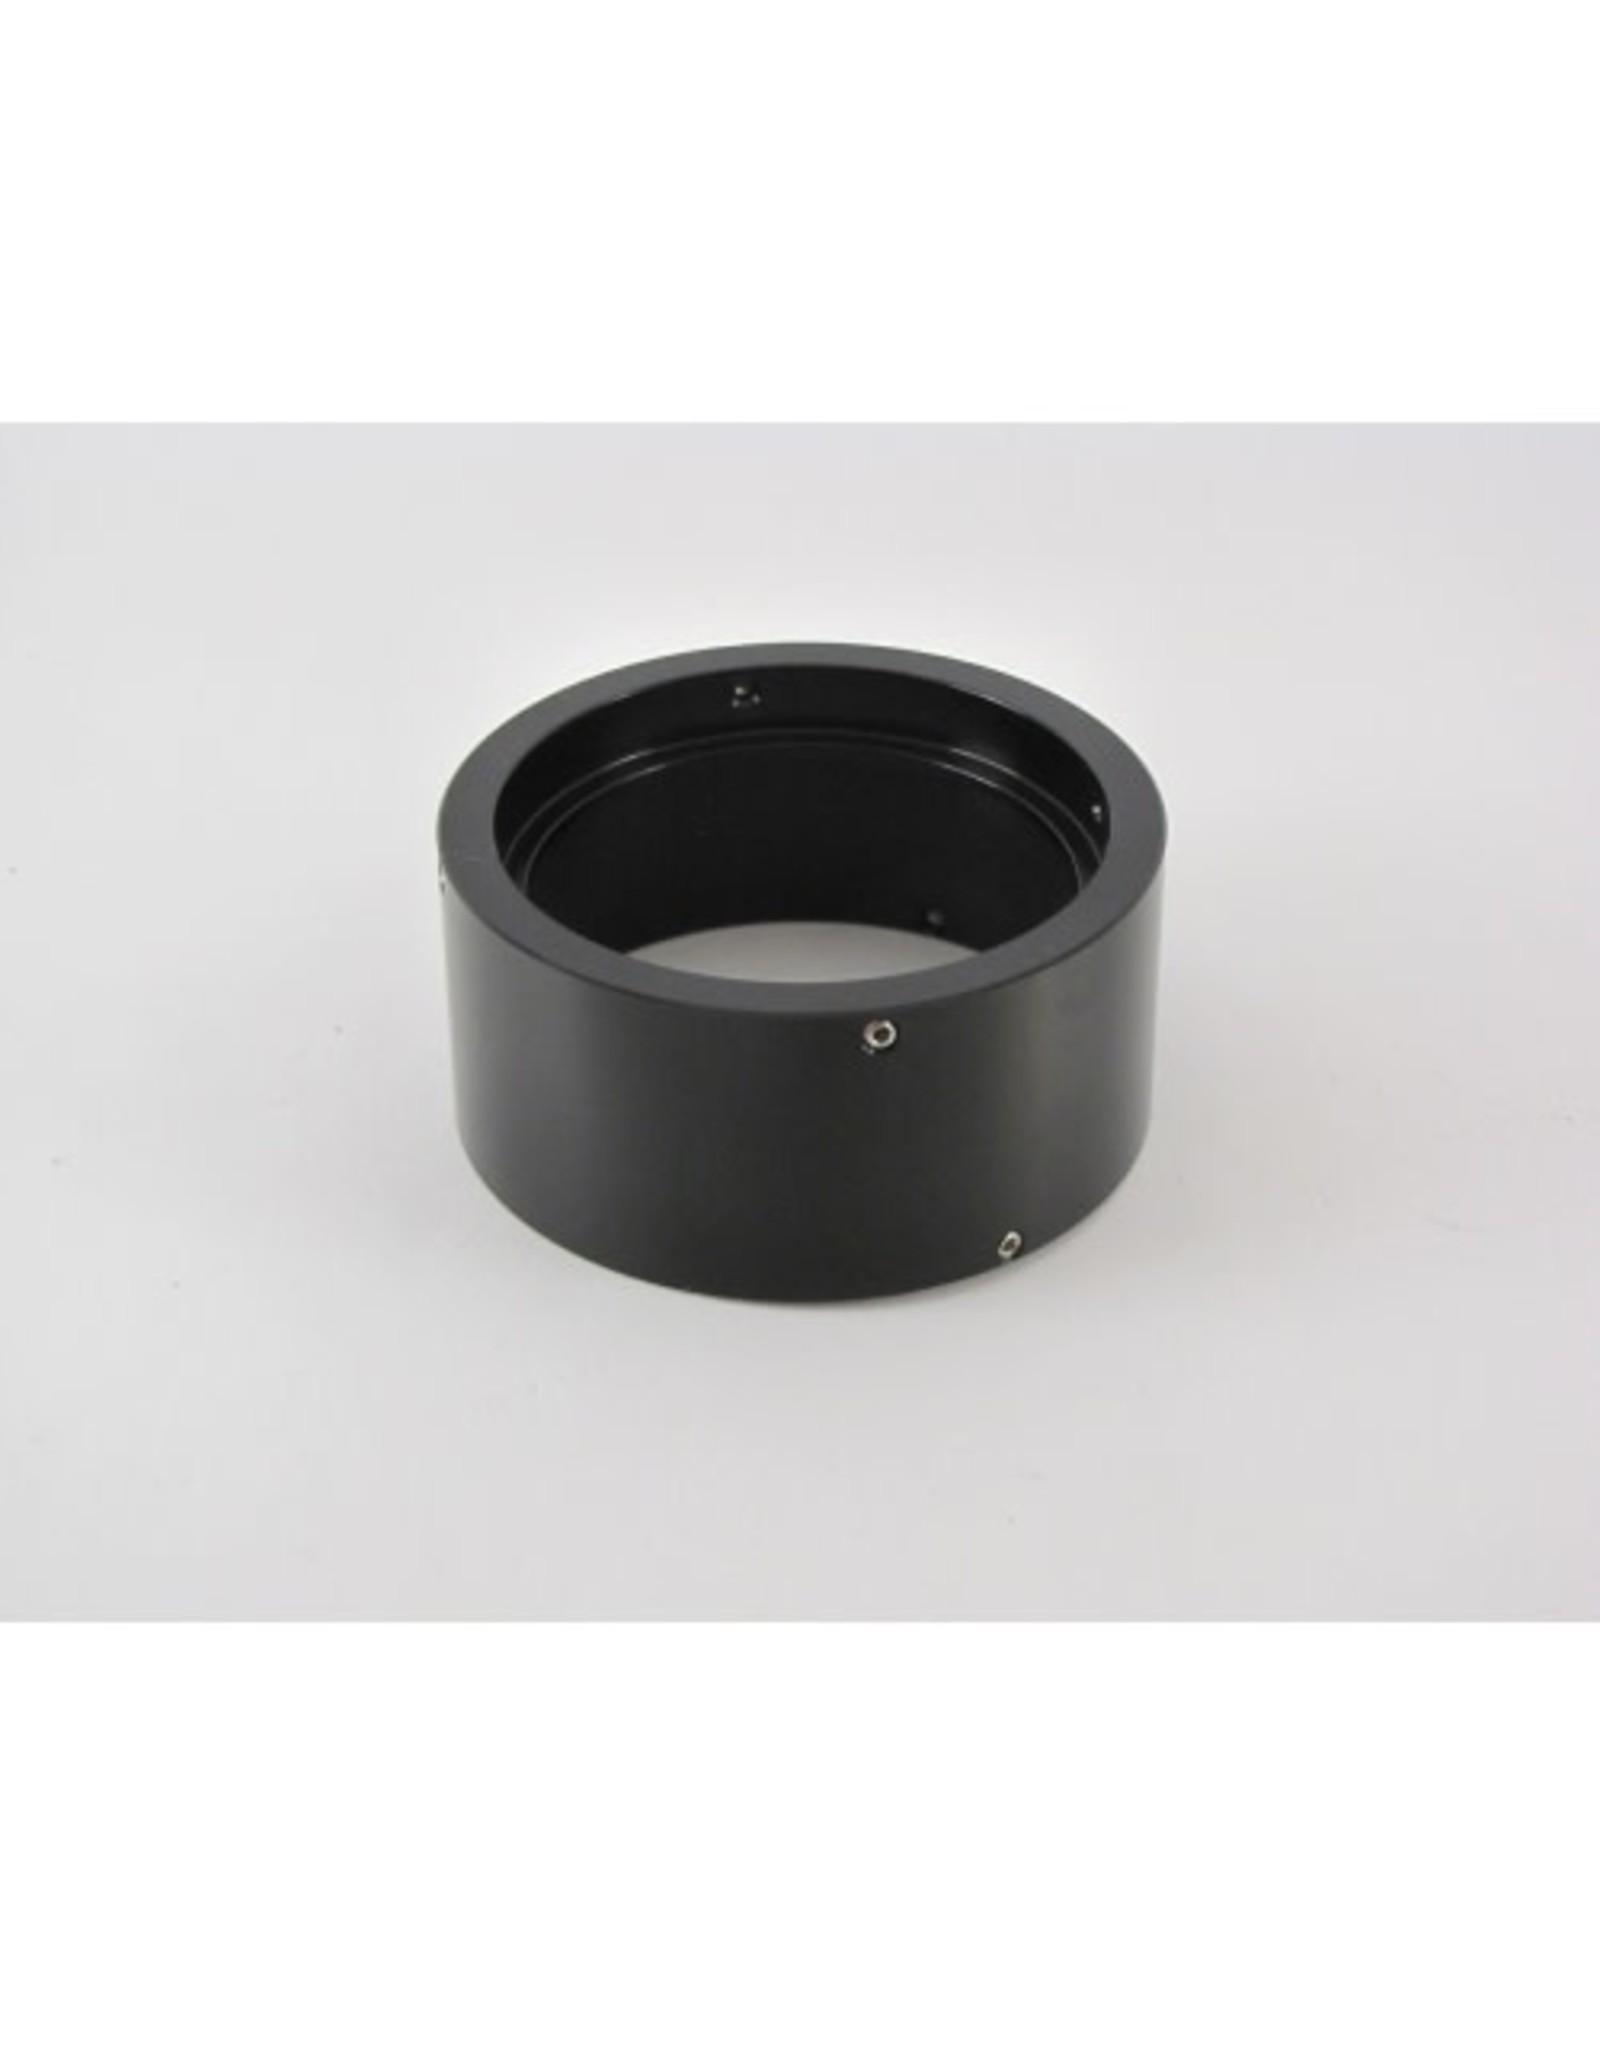 Feathertouch Feathertouch A20-243--Adapter 2.0" for MK67/MK69 telescopes